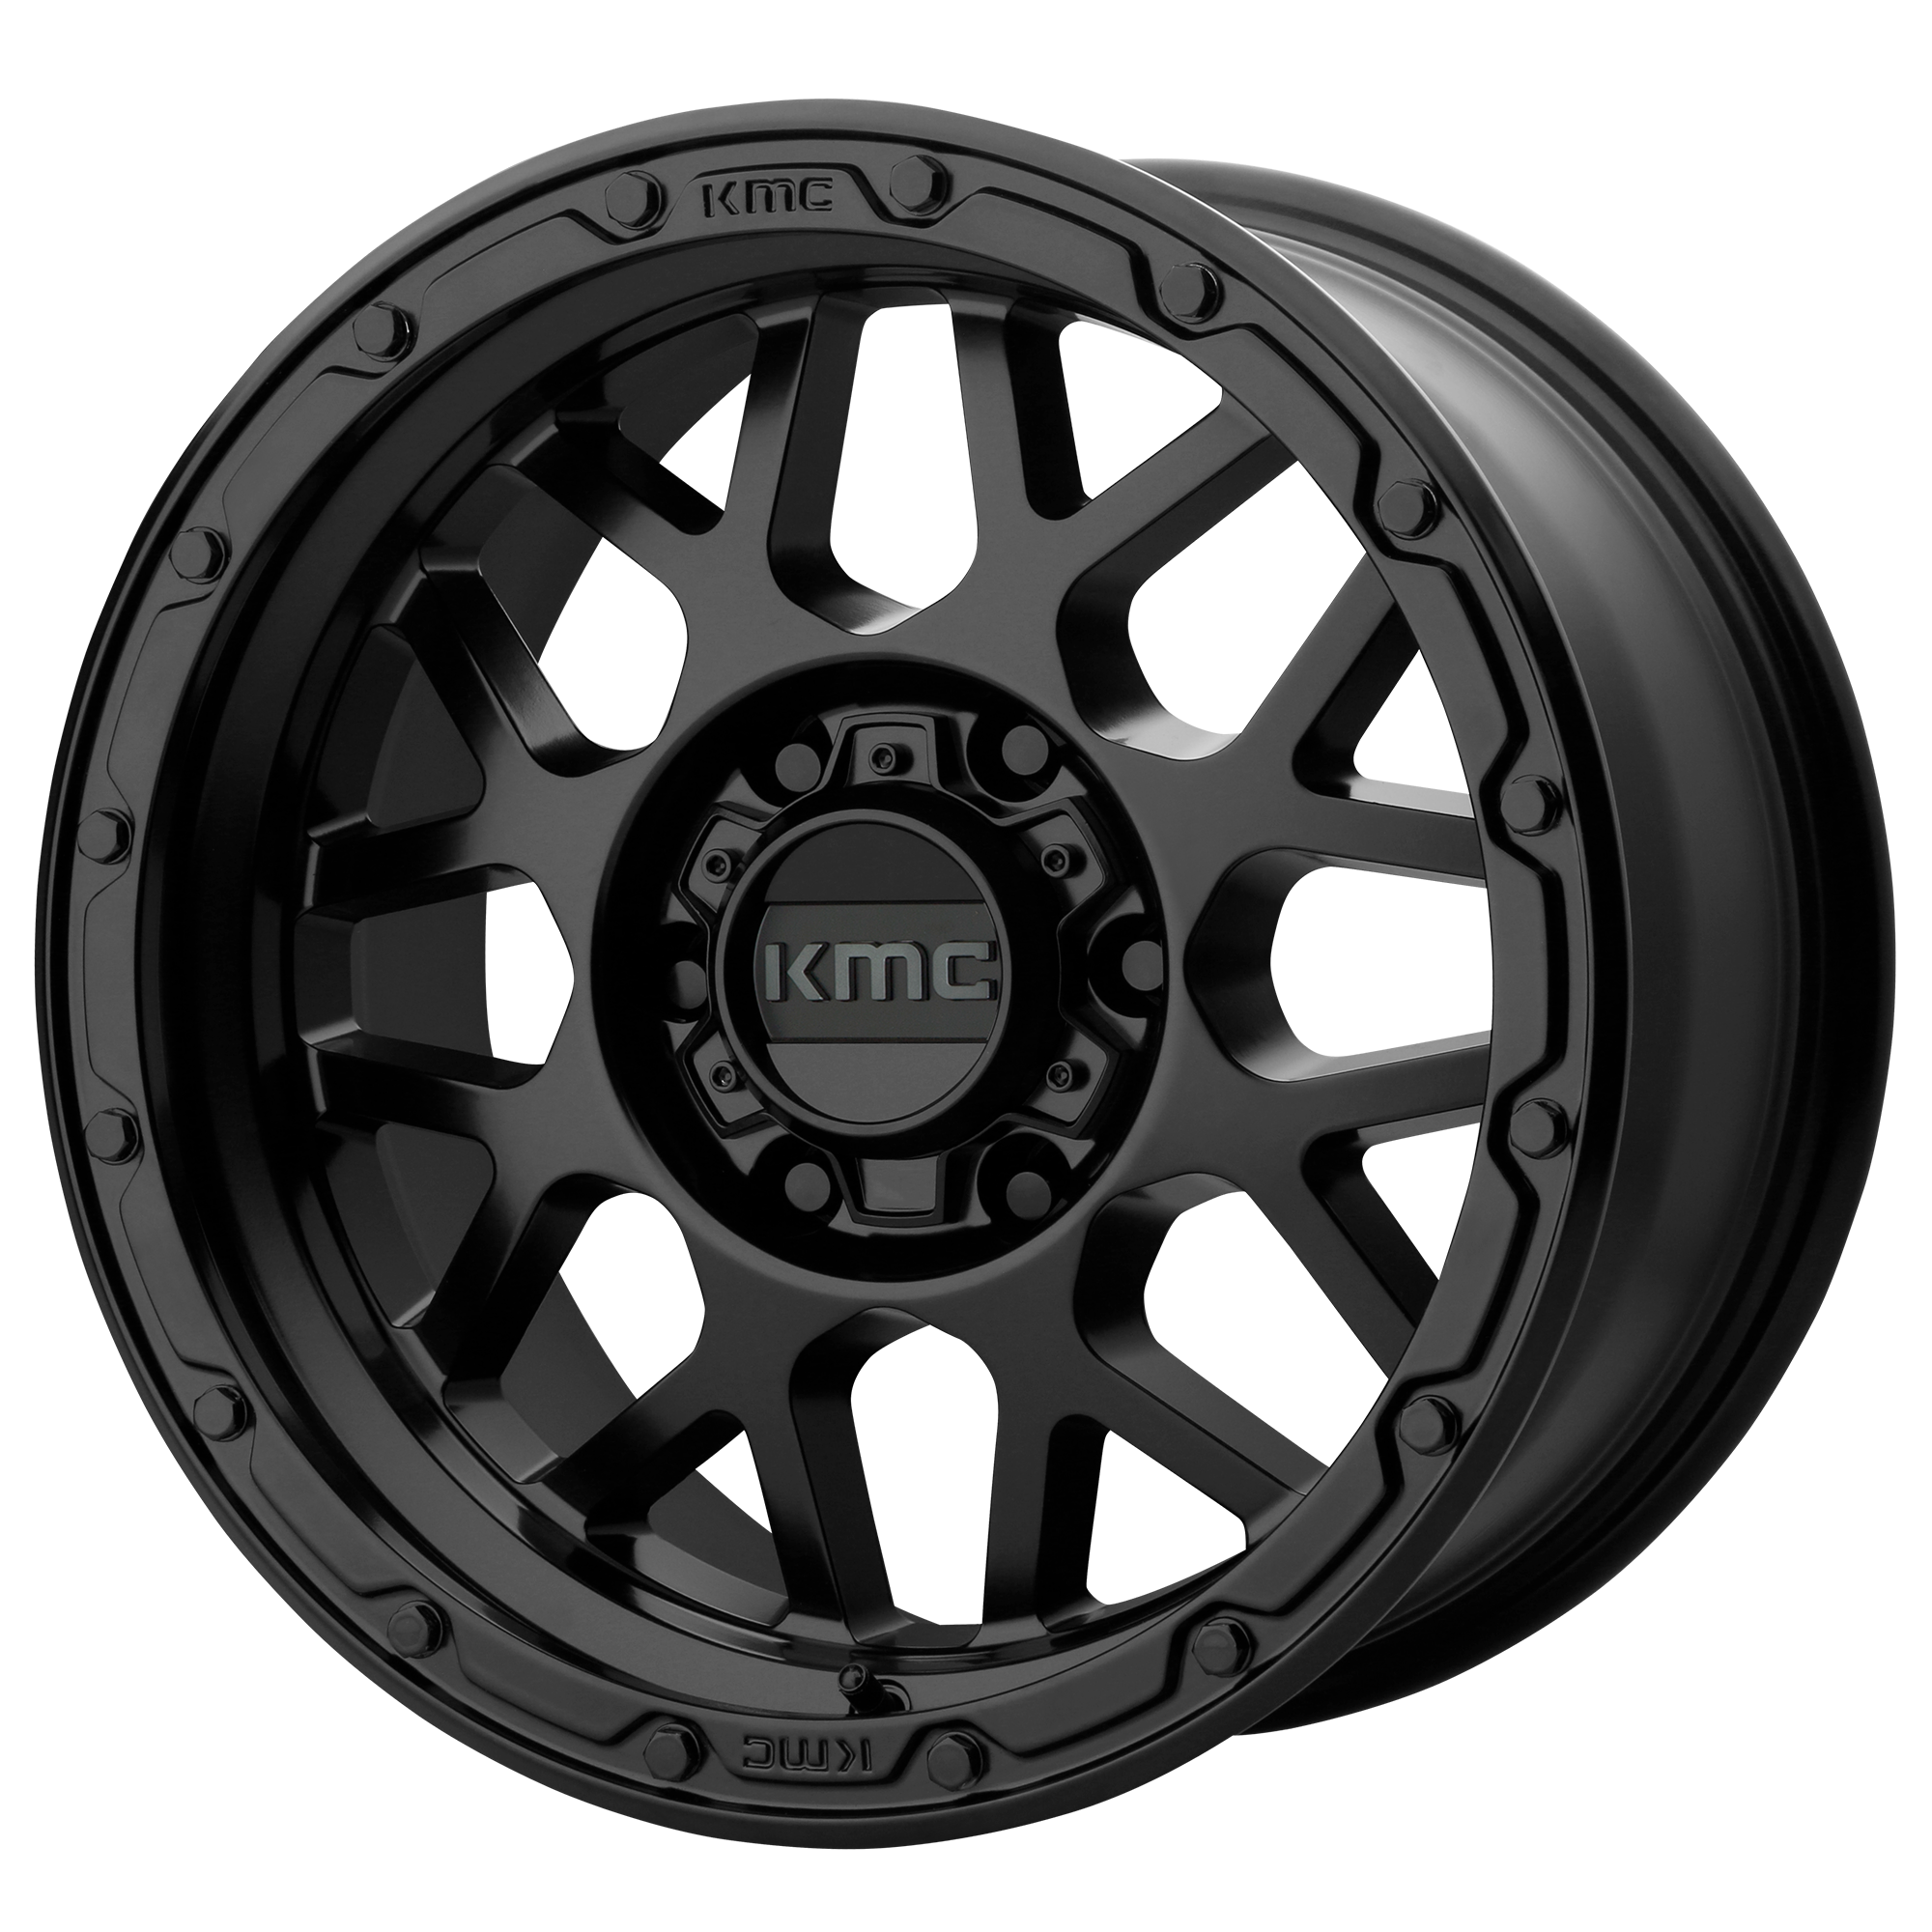 GRENADE OFF-ROAD 17x9 6x135.00 MATTE BLACK (18 mm) - Tires and Engine Performance